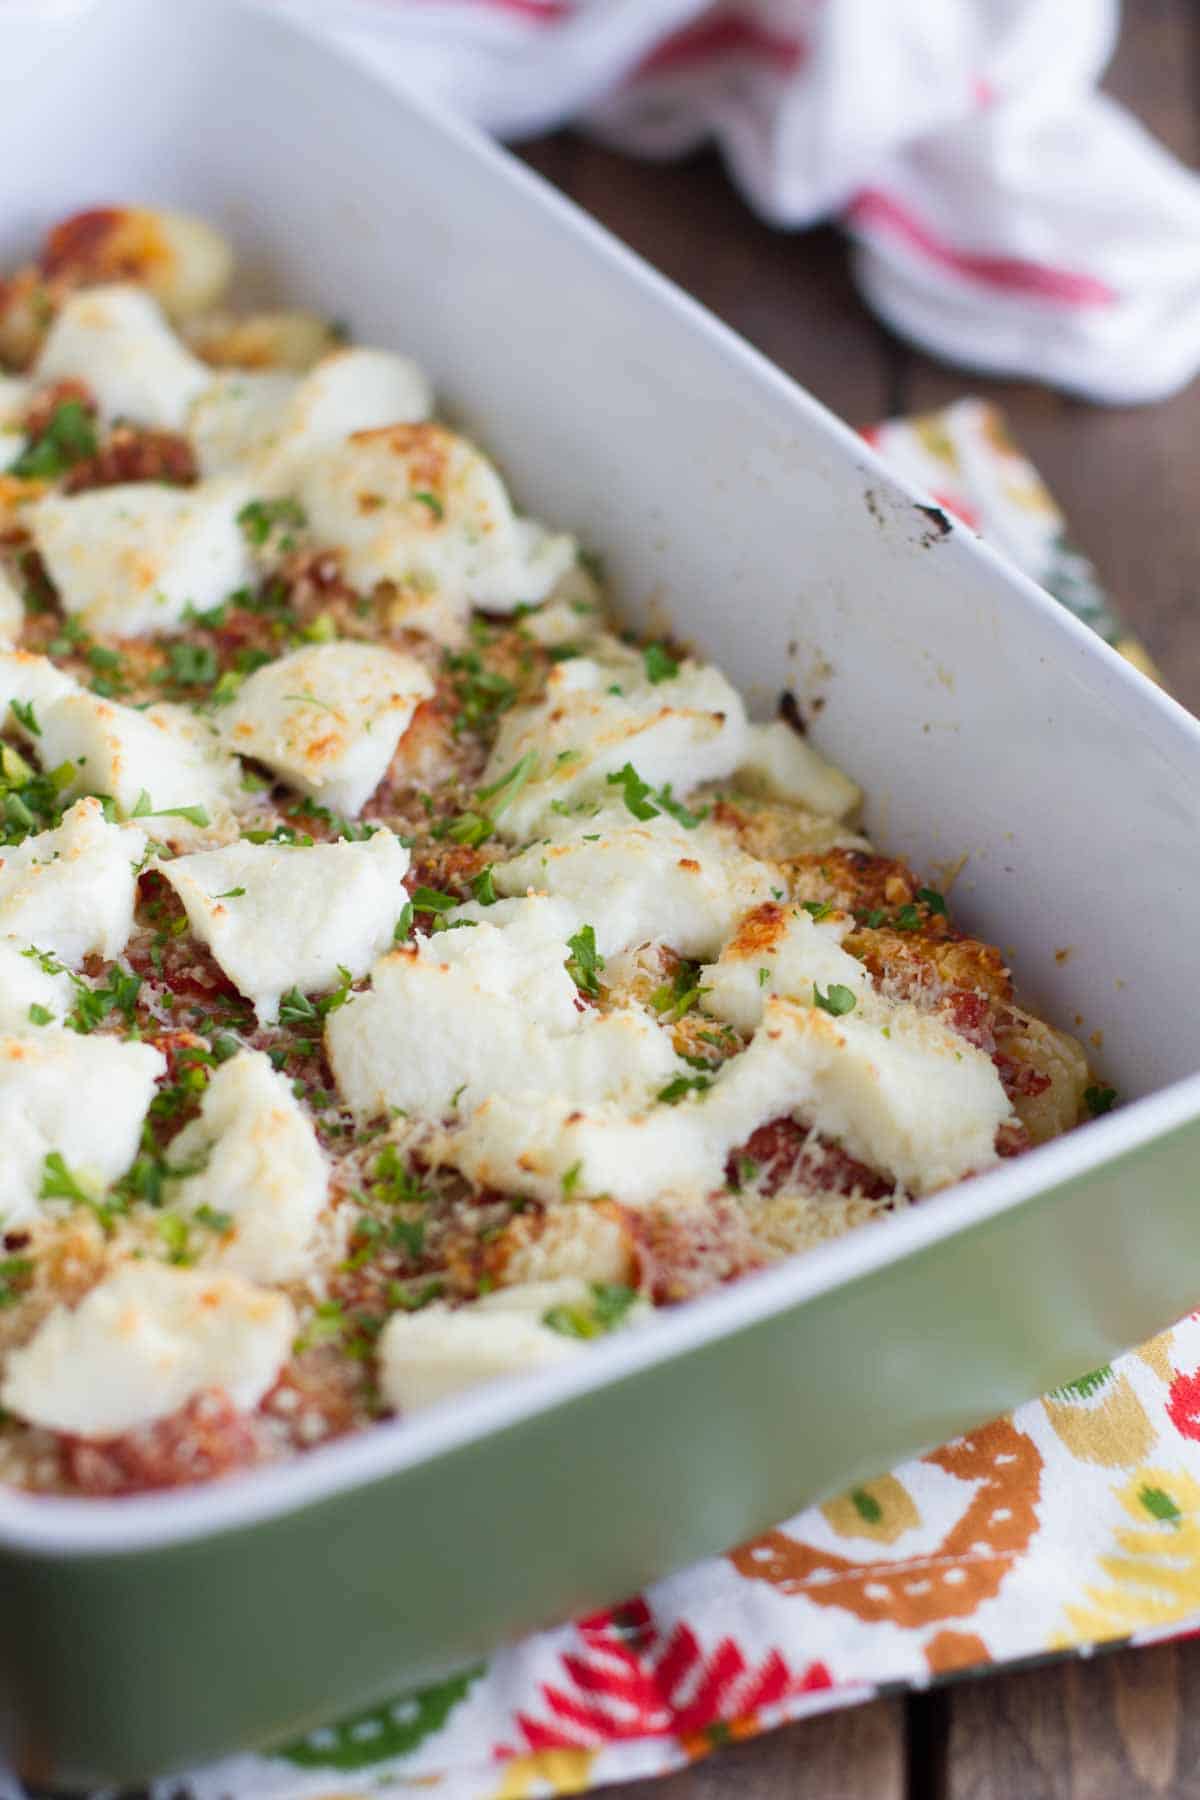 Gnocchi topped with ricotta and baked in a baking dish